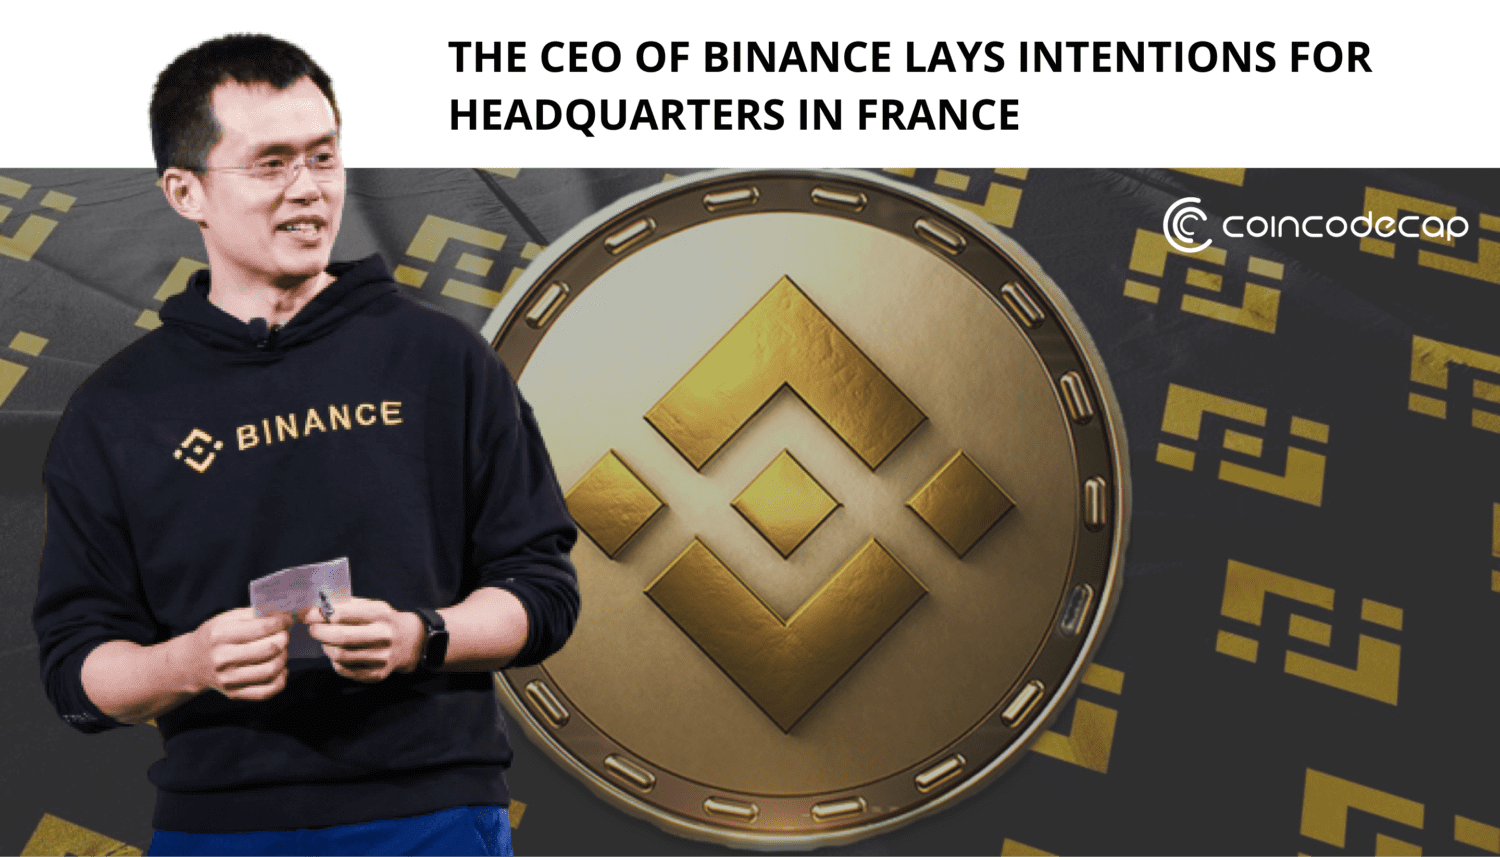 Binance Lays Intentions For Headquarters In France